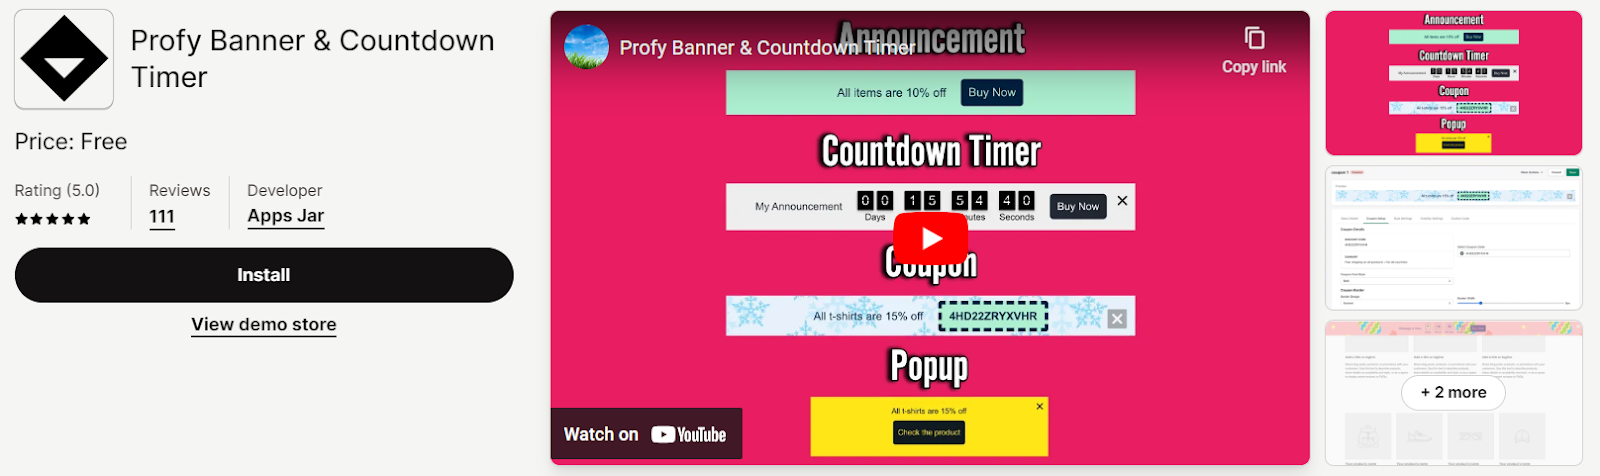 Profy Banner & Countdown Timer is one of the best countdown timer apps for Shopify.